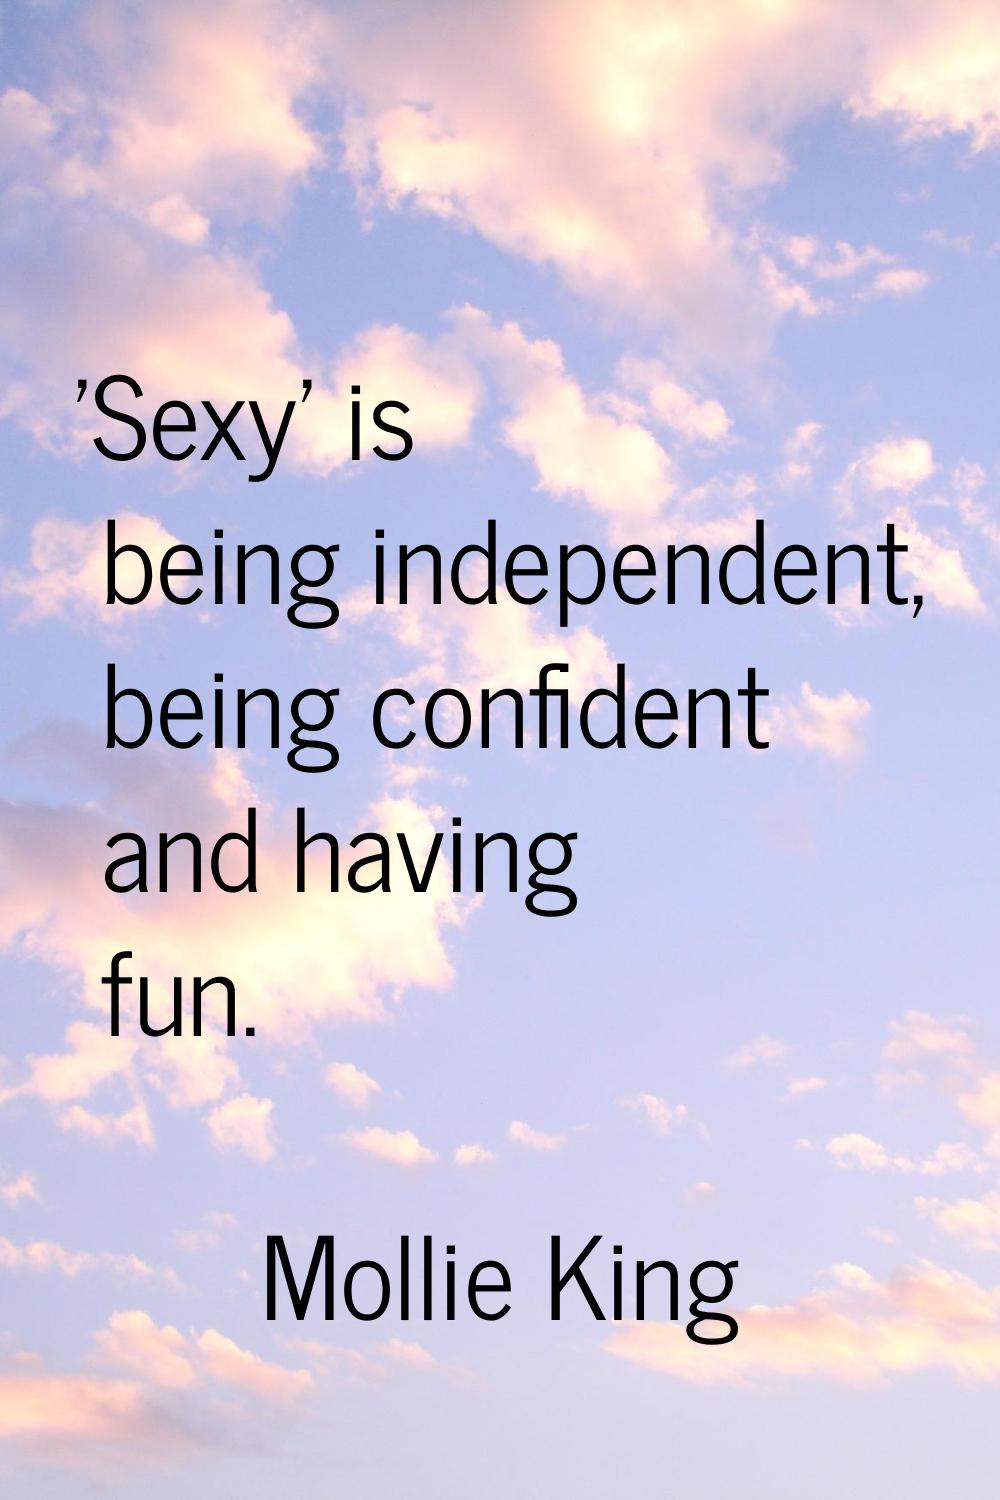 'Sexy' is being independent, being confident and having fun.